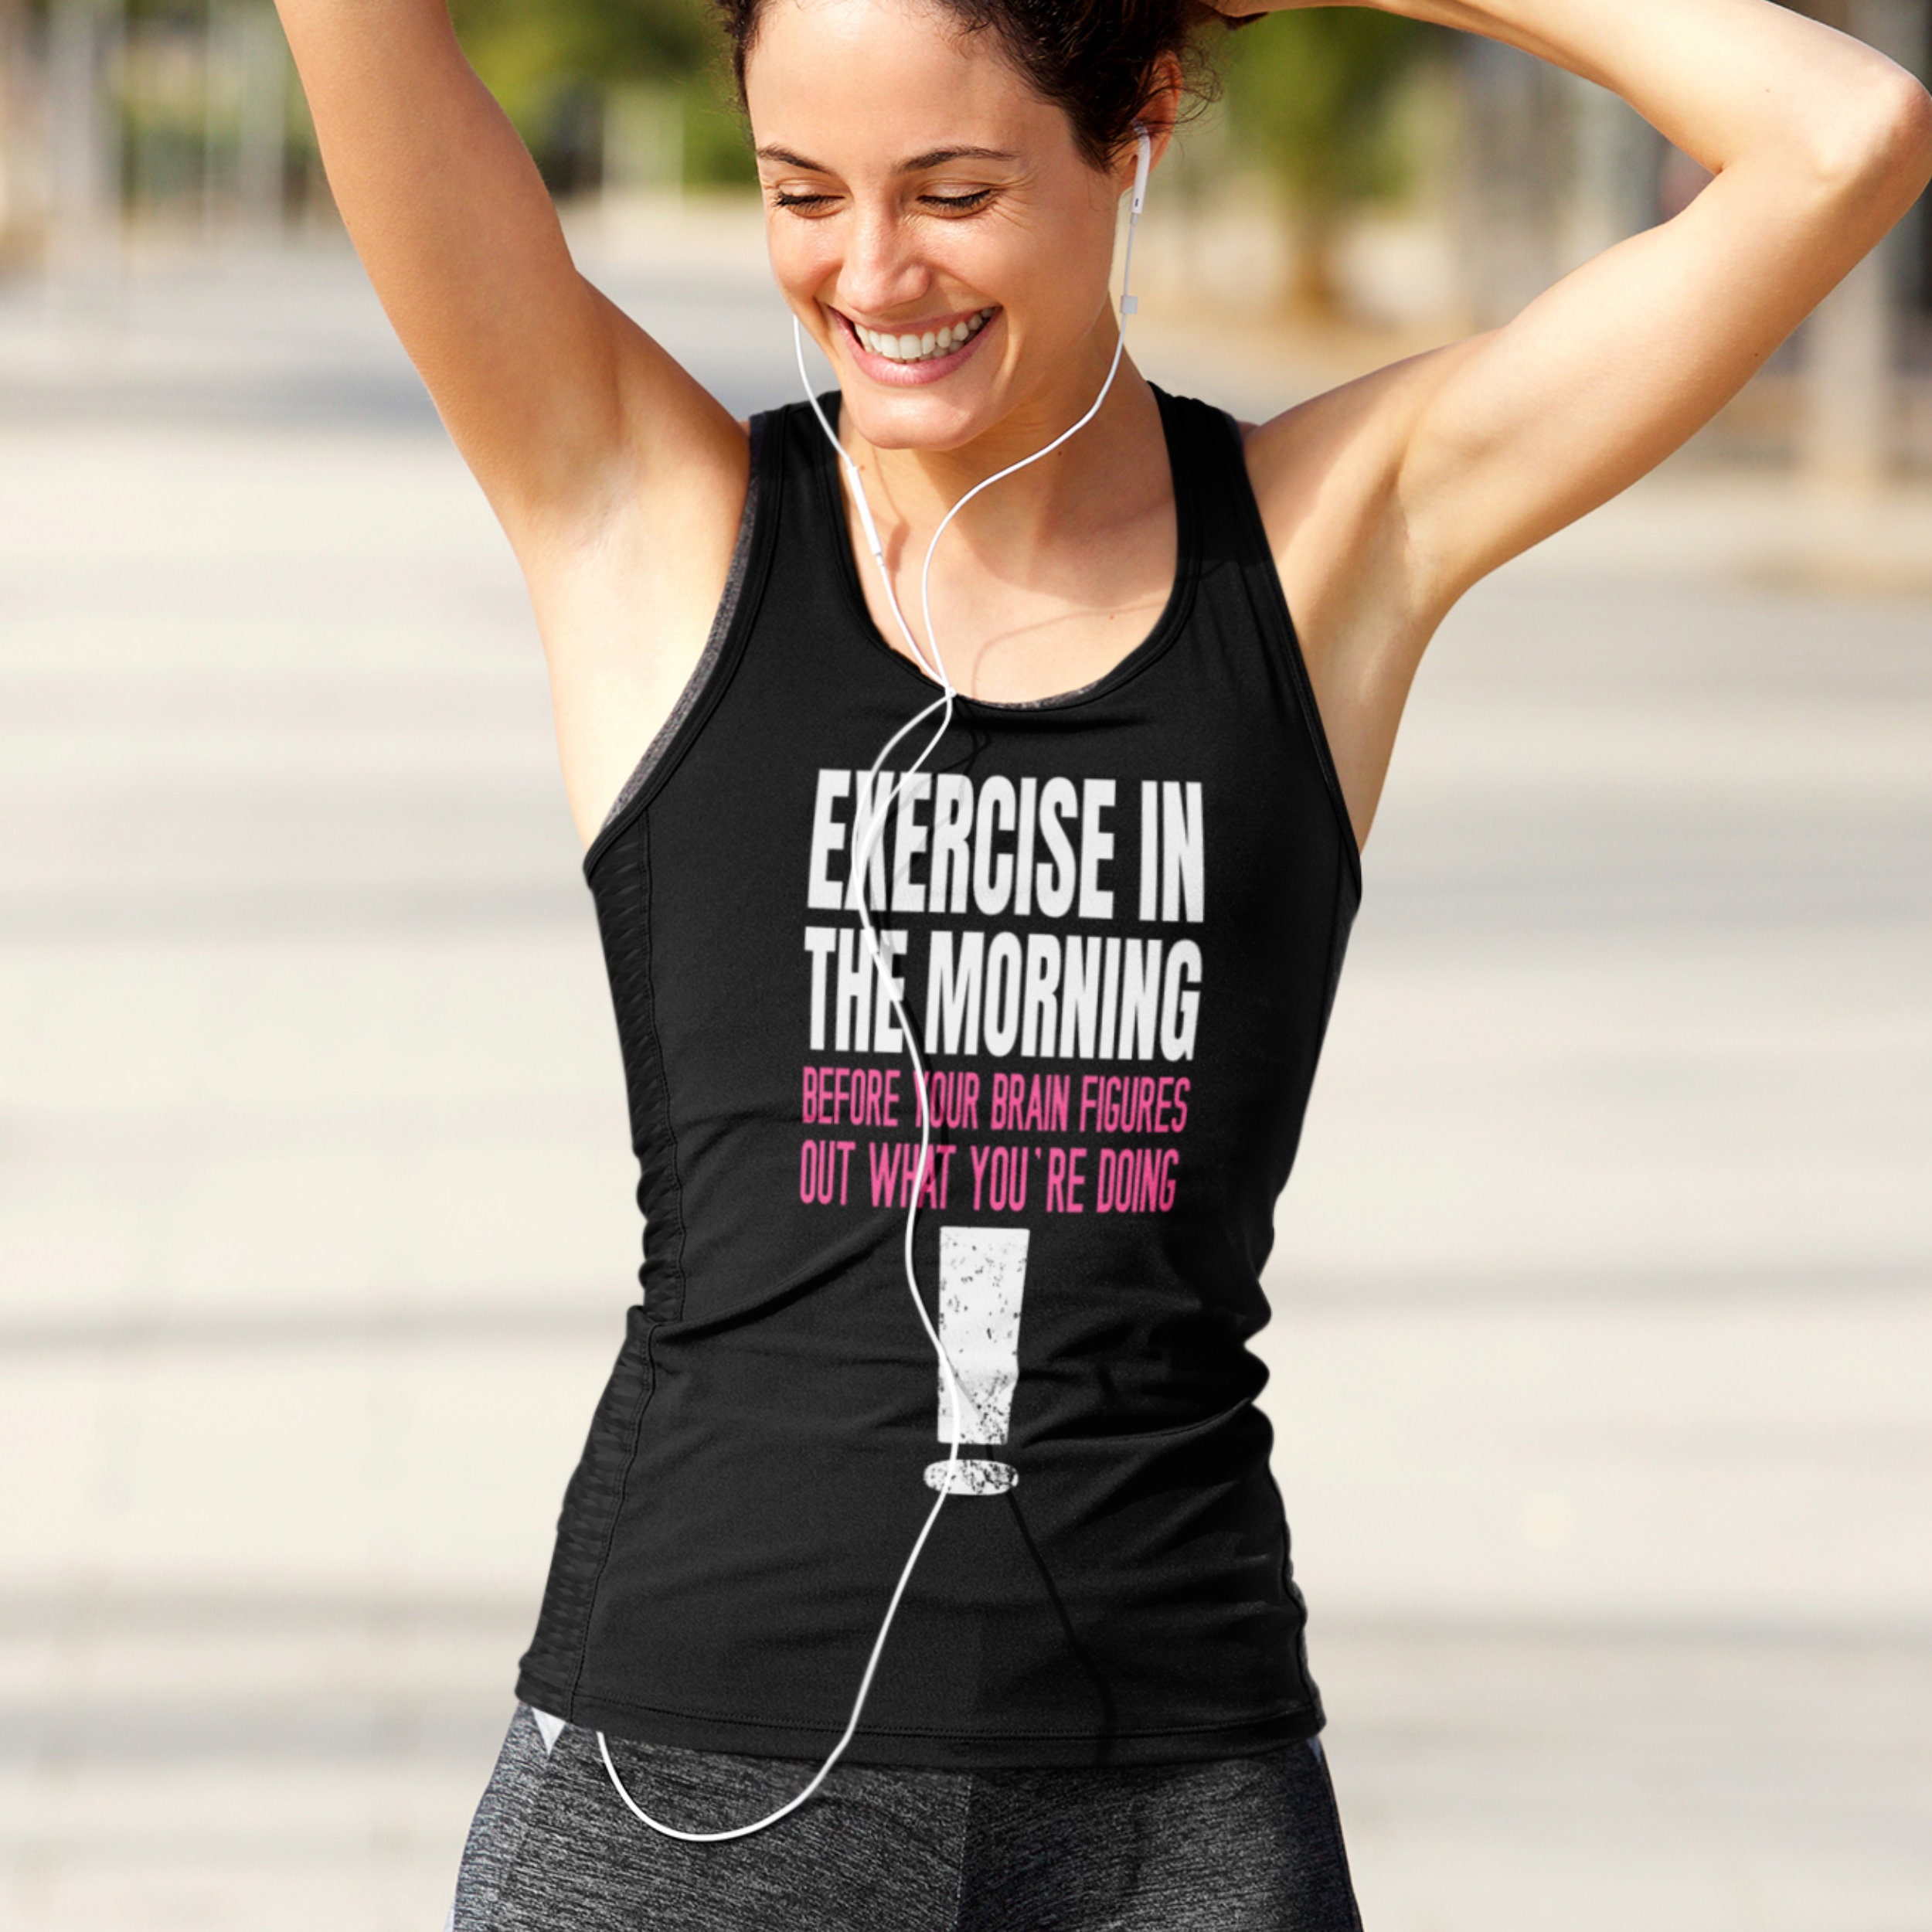 Funny Workout Tanks for Ladies, Fitness Shirt for Women, Workout